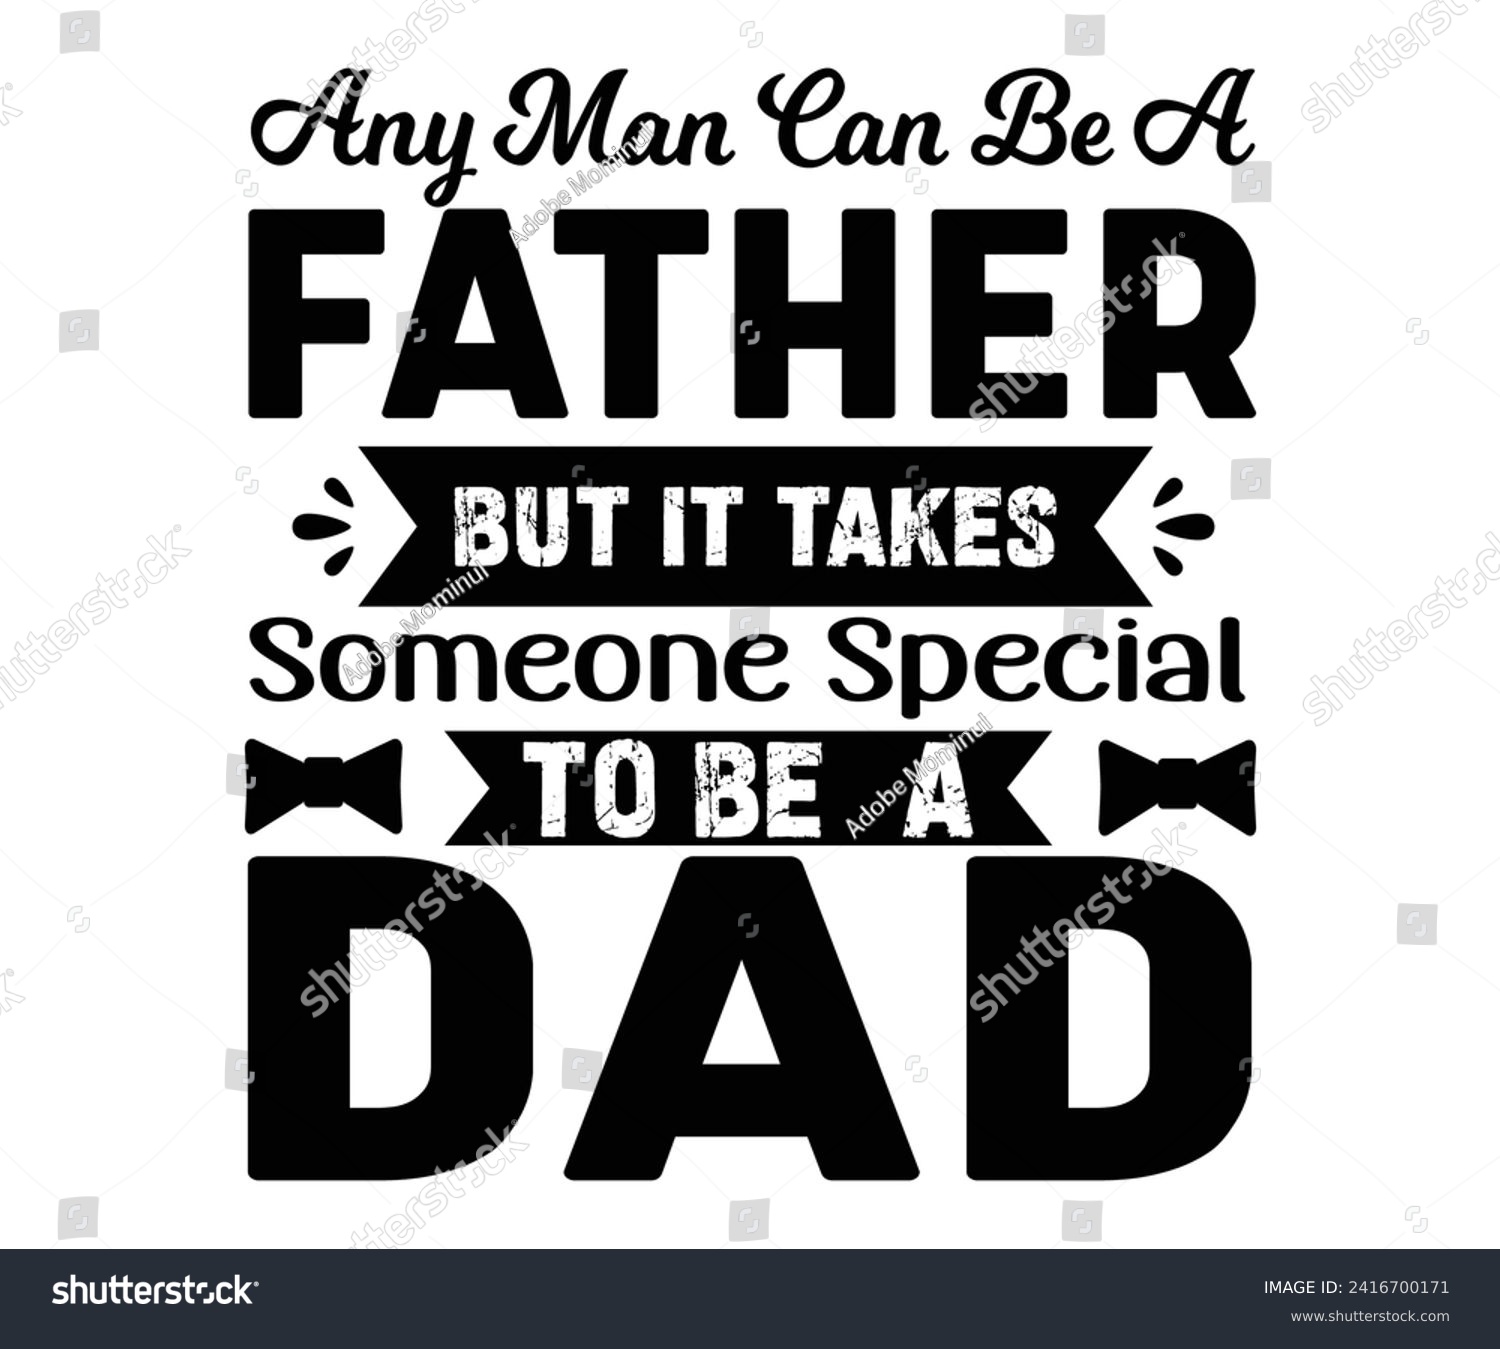 SVG of Any Man Can Be A Father But It Takes Someone Special to Be A Dad Svg,Father's Day Svg,Papa svg,Grandpa Svg,Father's Day Saying Qoutes,Dad Svg,Funny Father, Gift For Dad Svg,Daddy Svg,Family shirt, svg